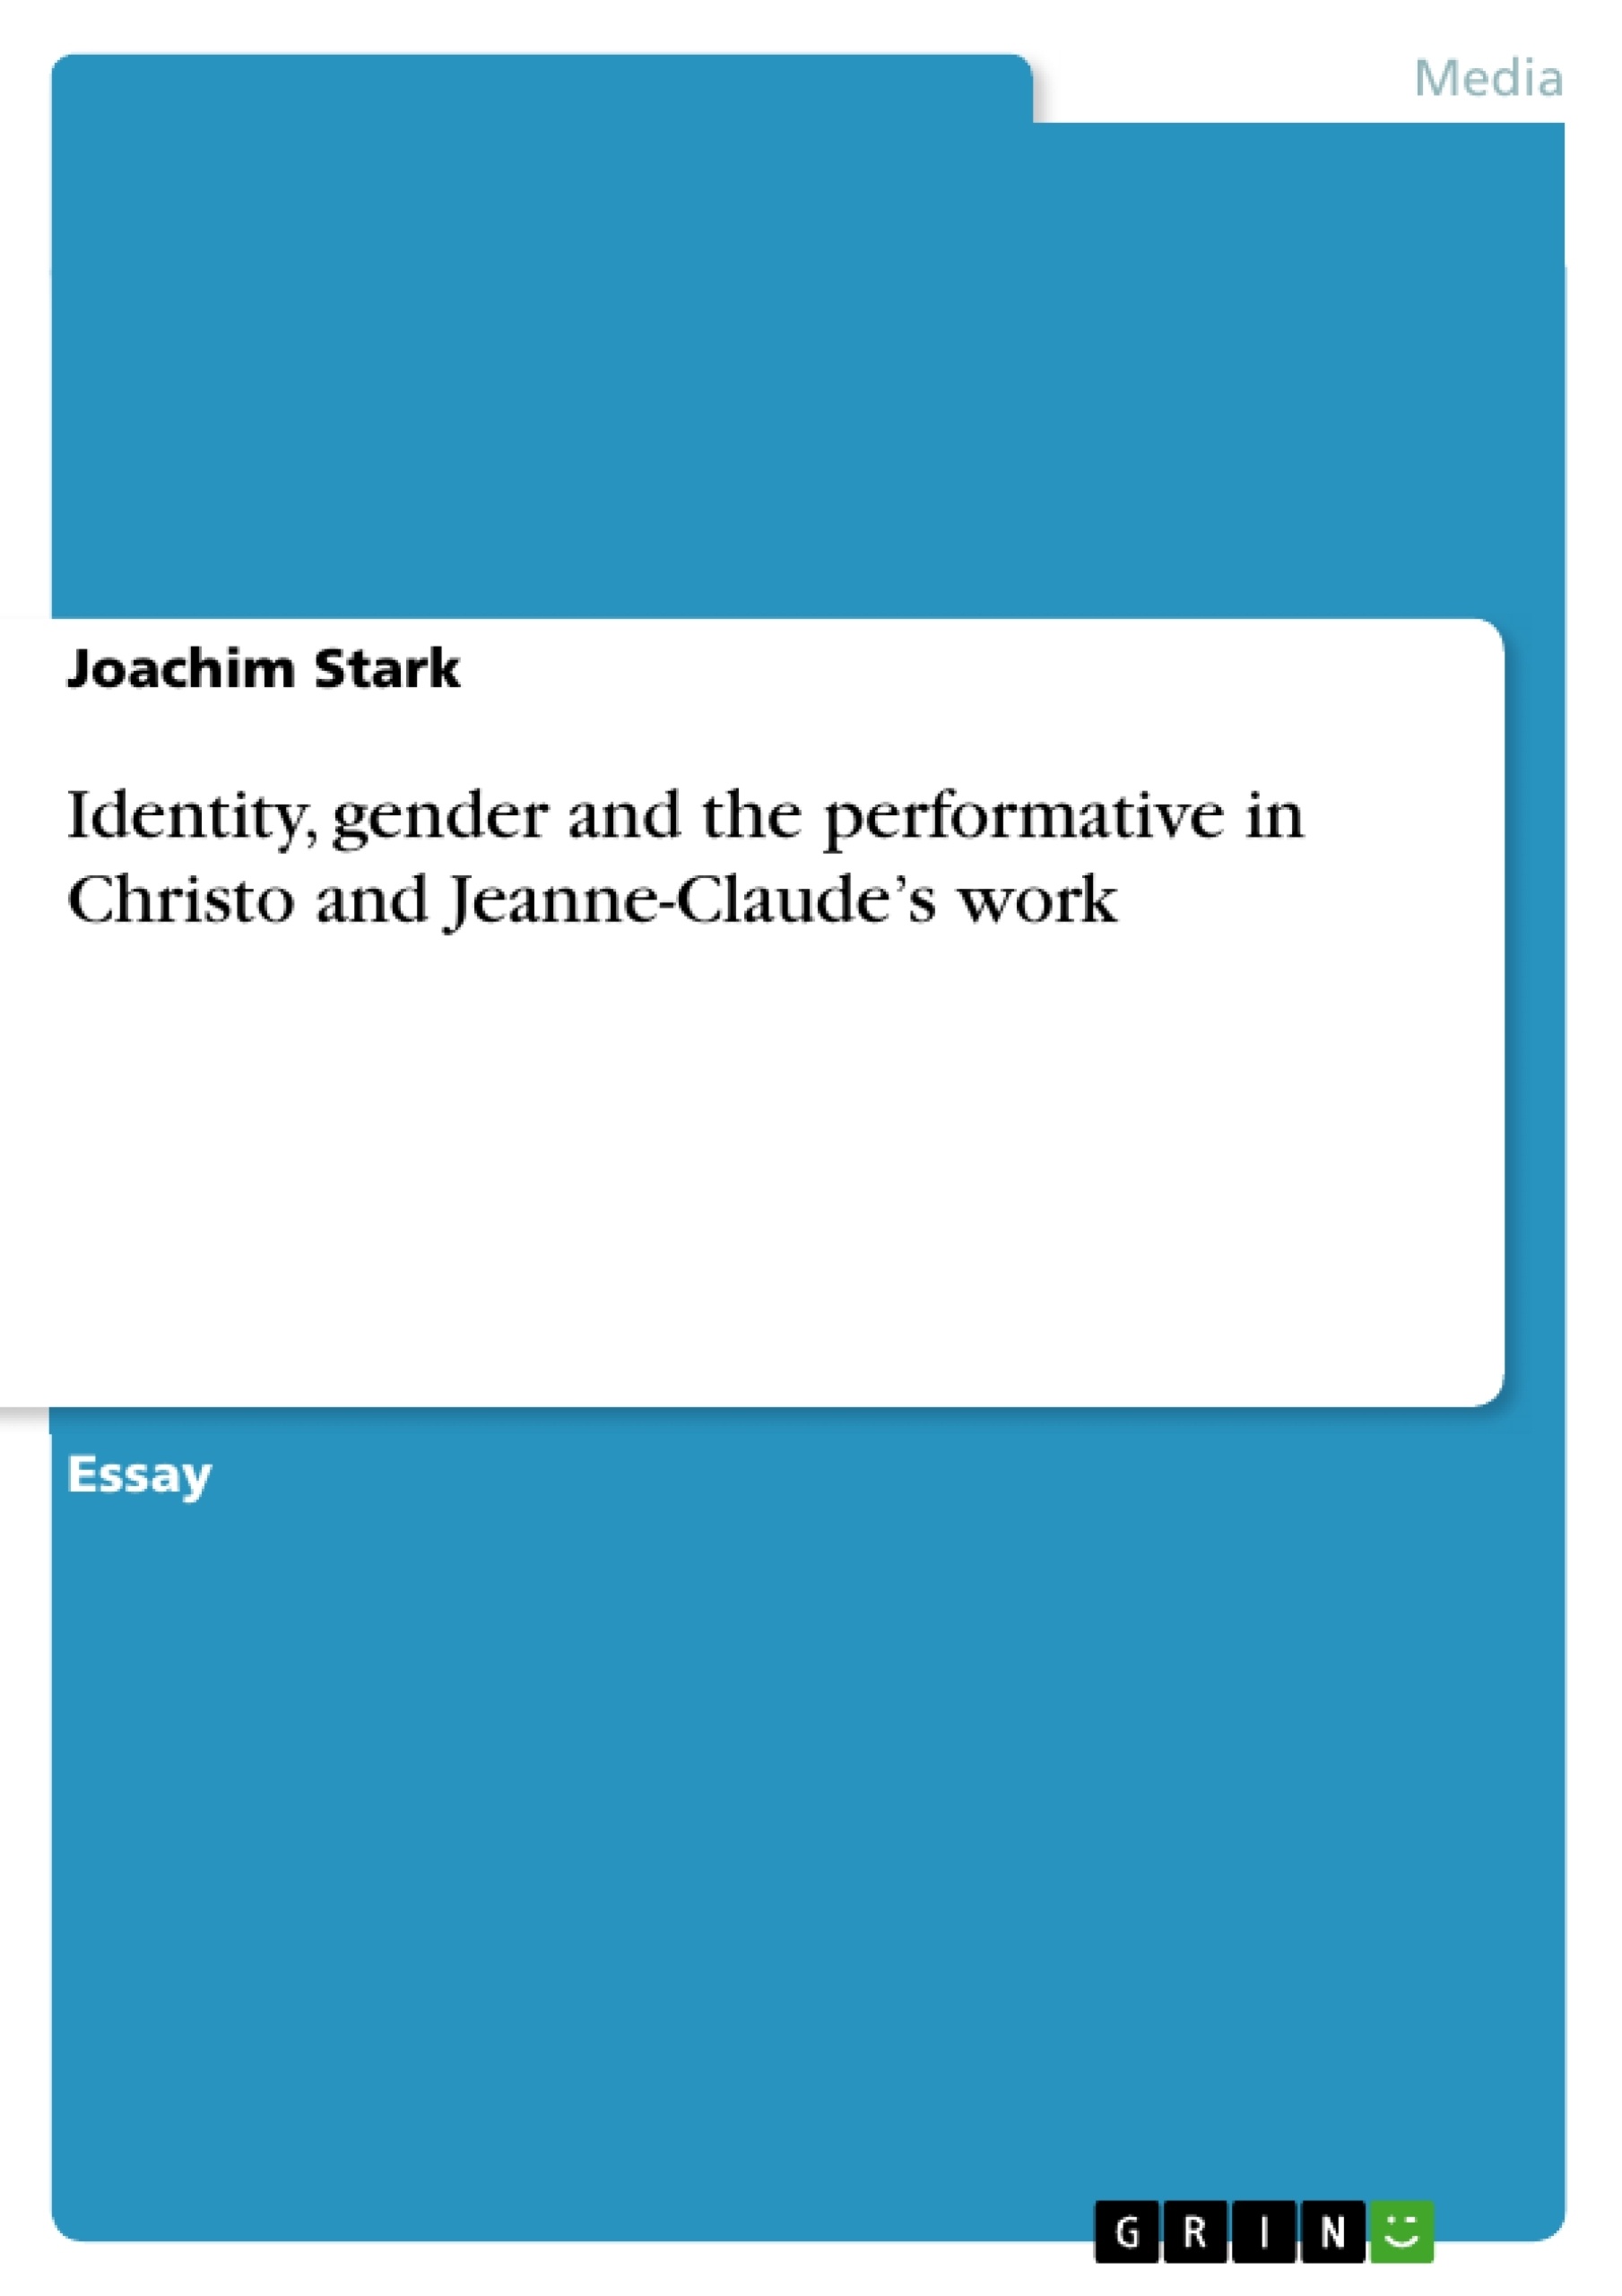 Title: Identity, gender and the performative in Christo and Jeanne-Claude’s work